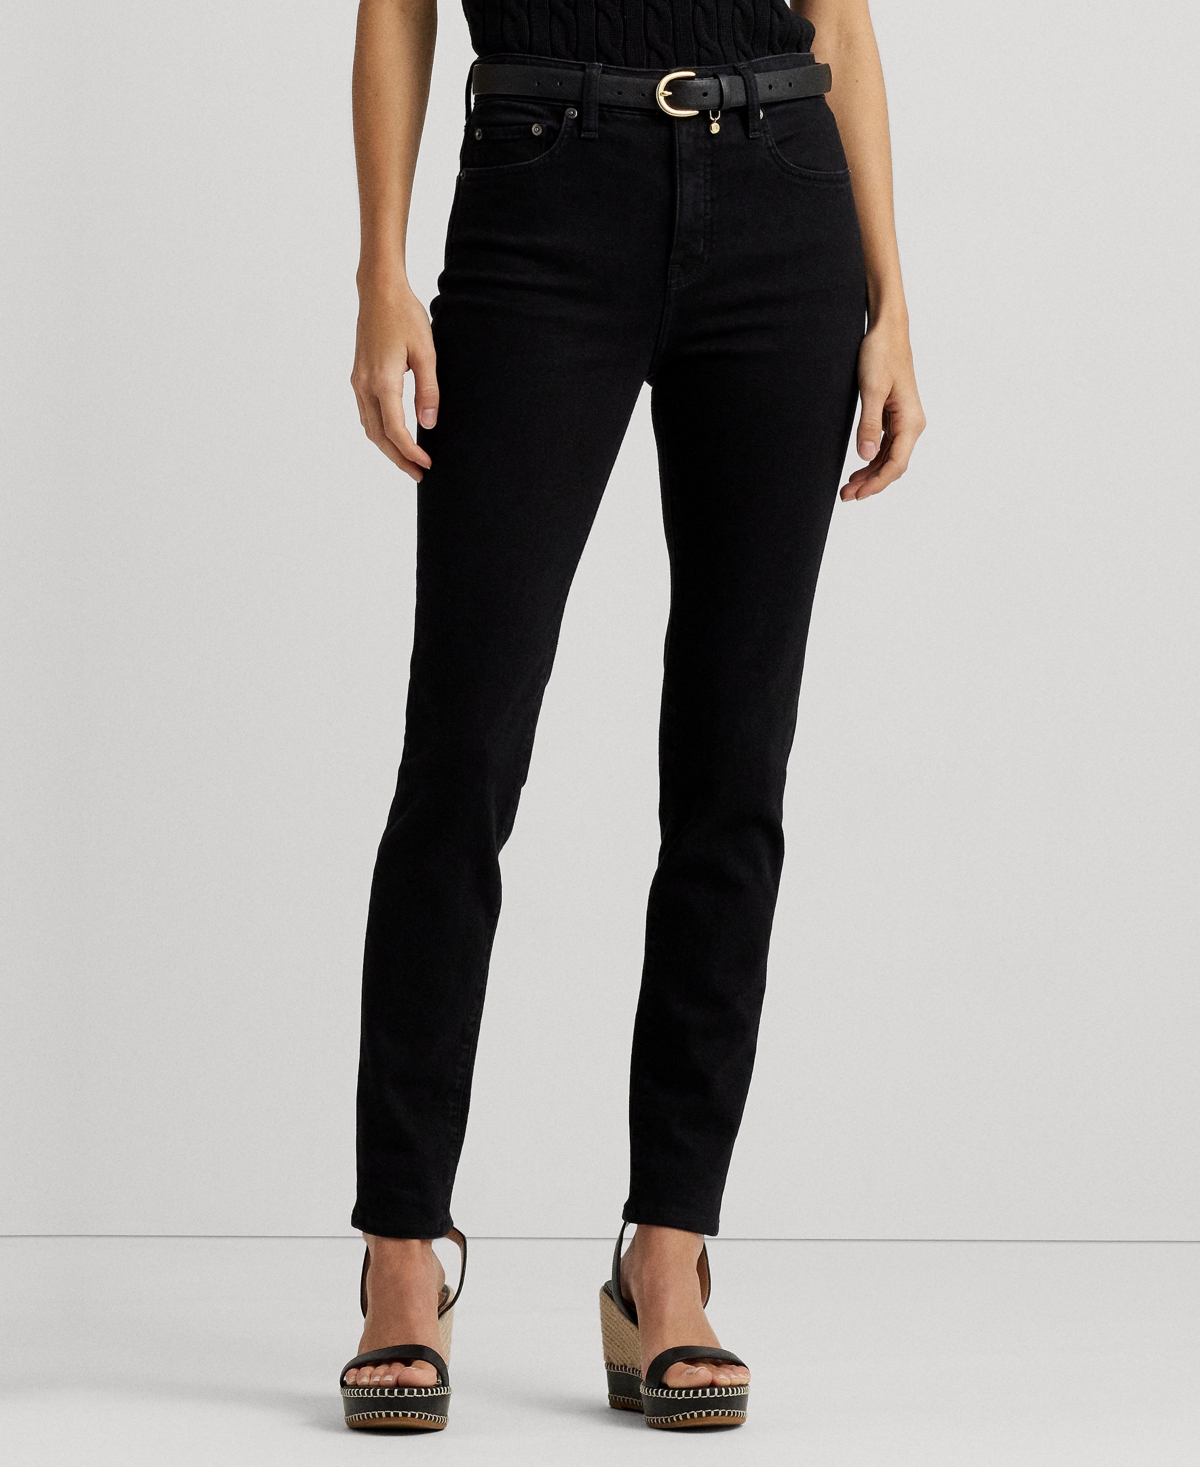 Women's High-Rise Skinny Ankle Jeans - Black